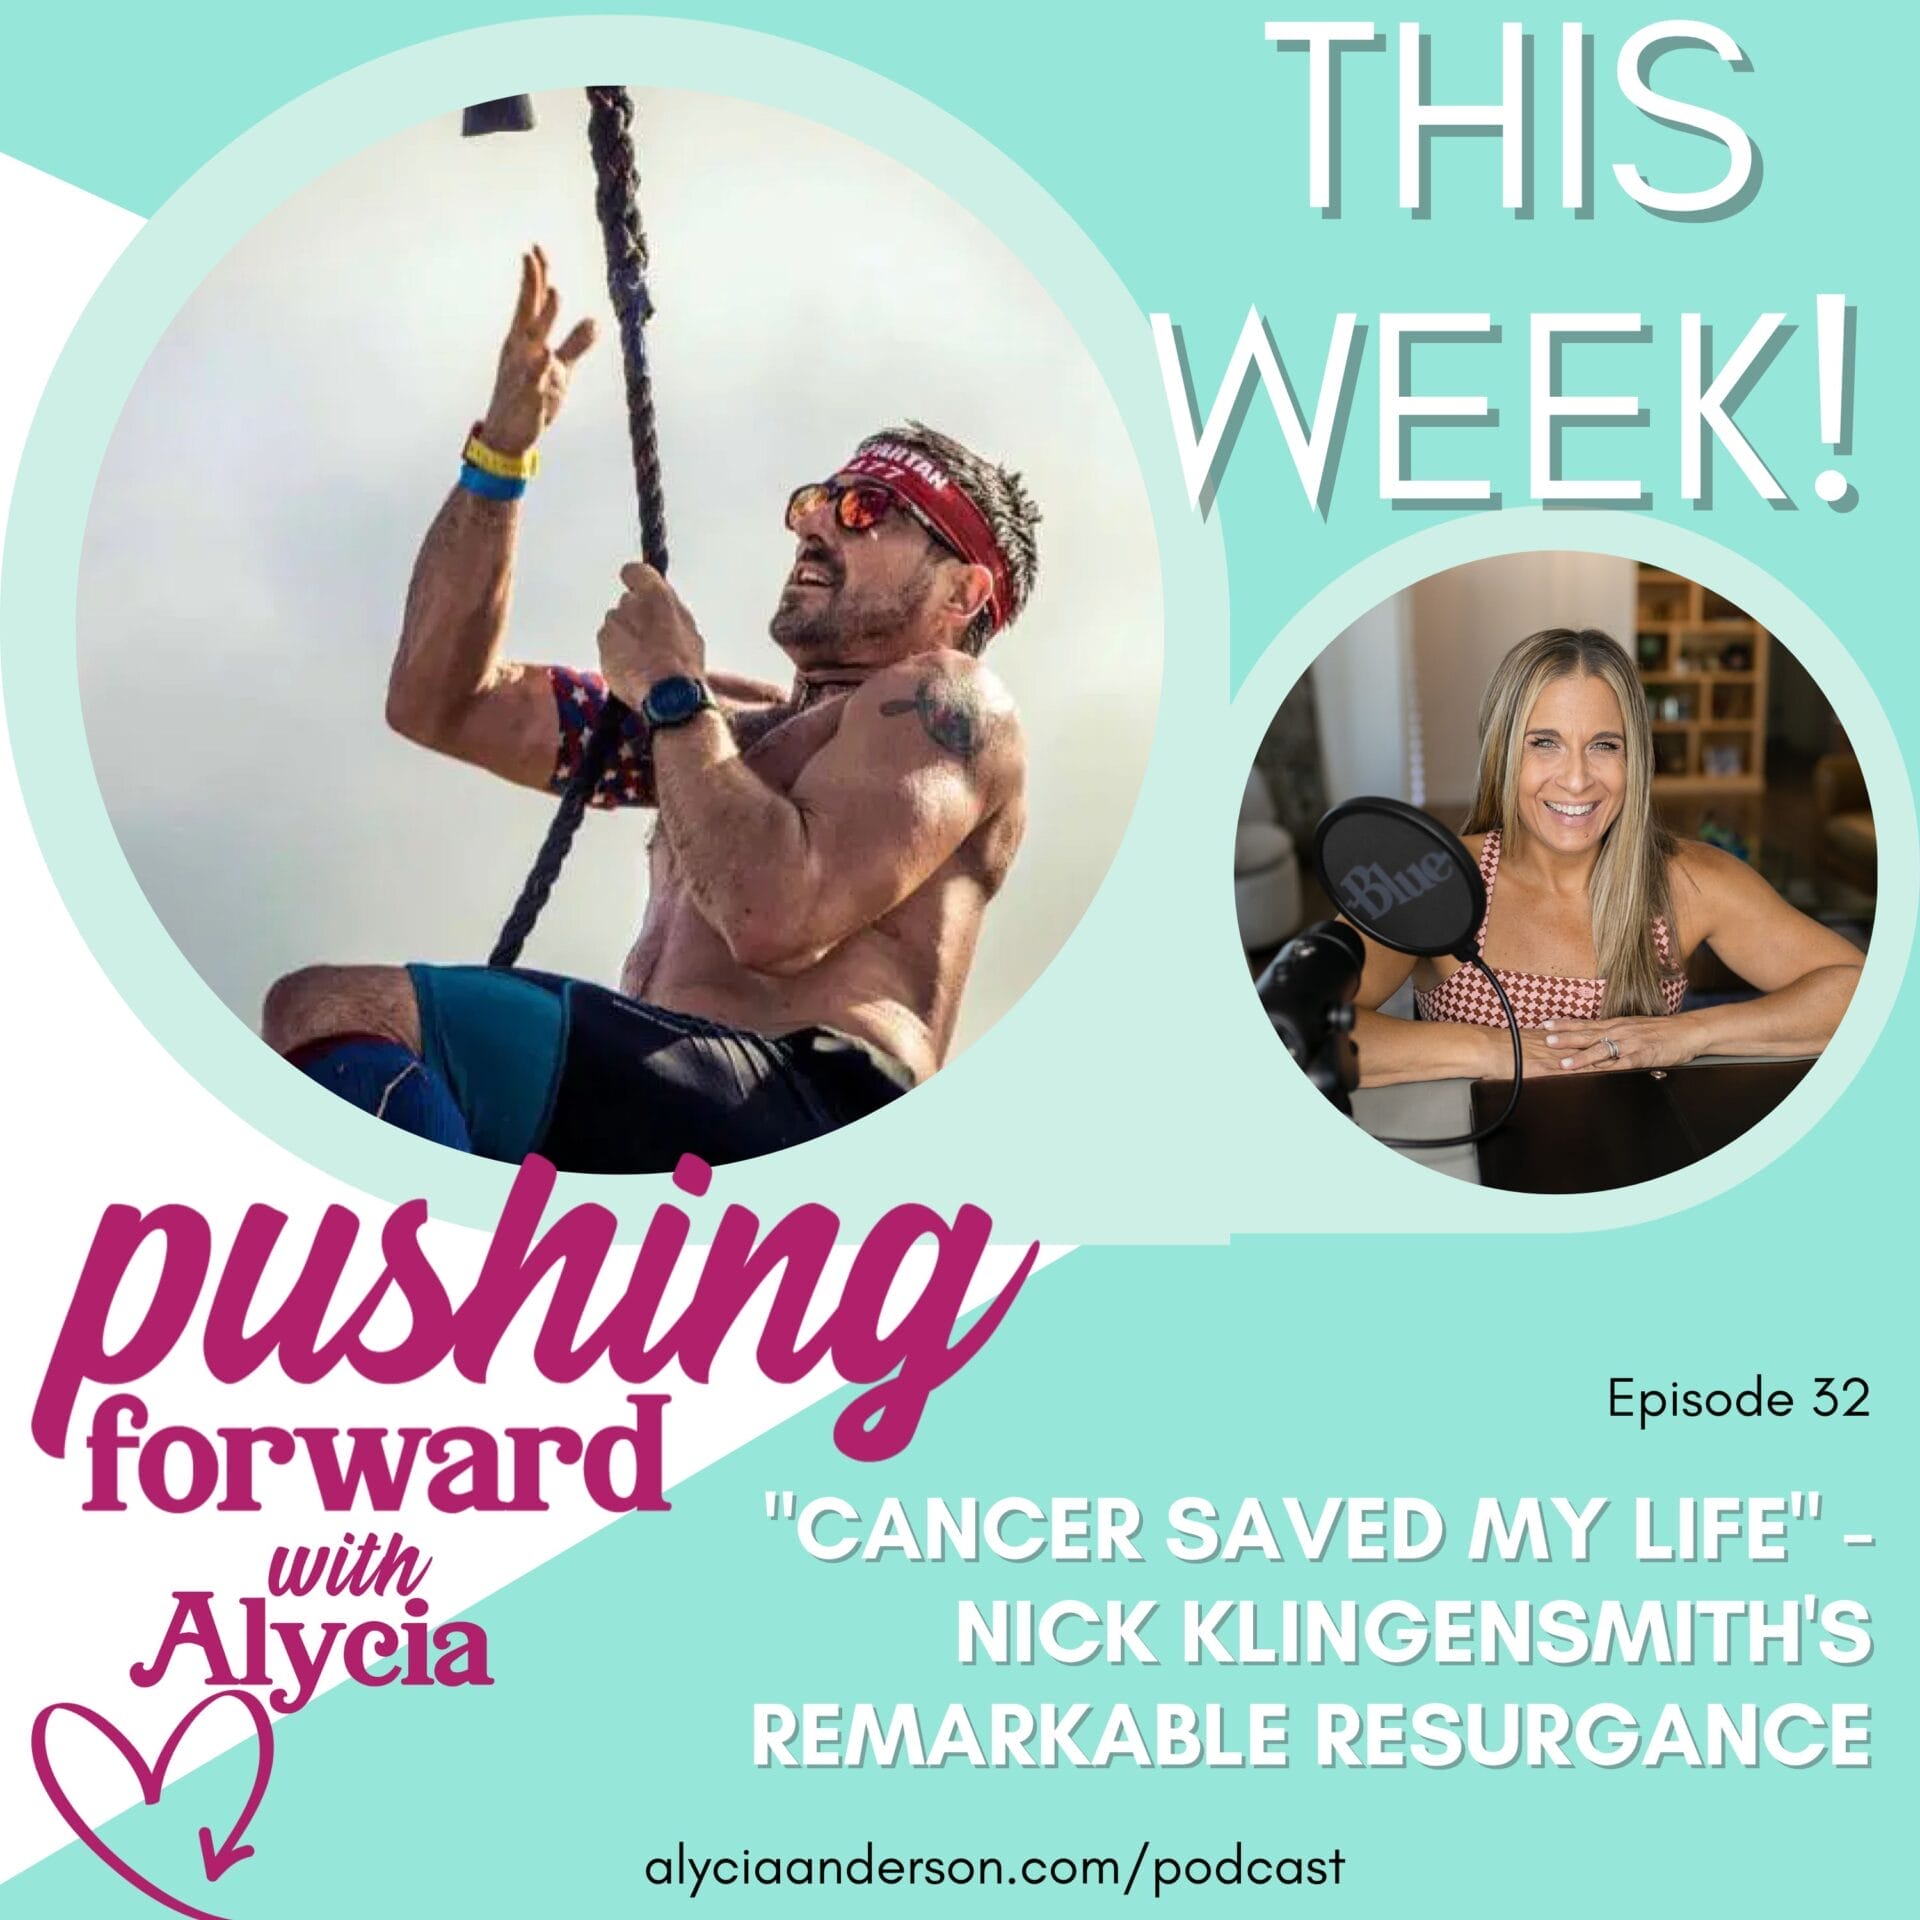 episode thirty two of pushing forward with alycia podcast featuring nick klingensmith and how cancer saved his life